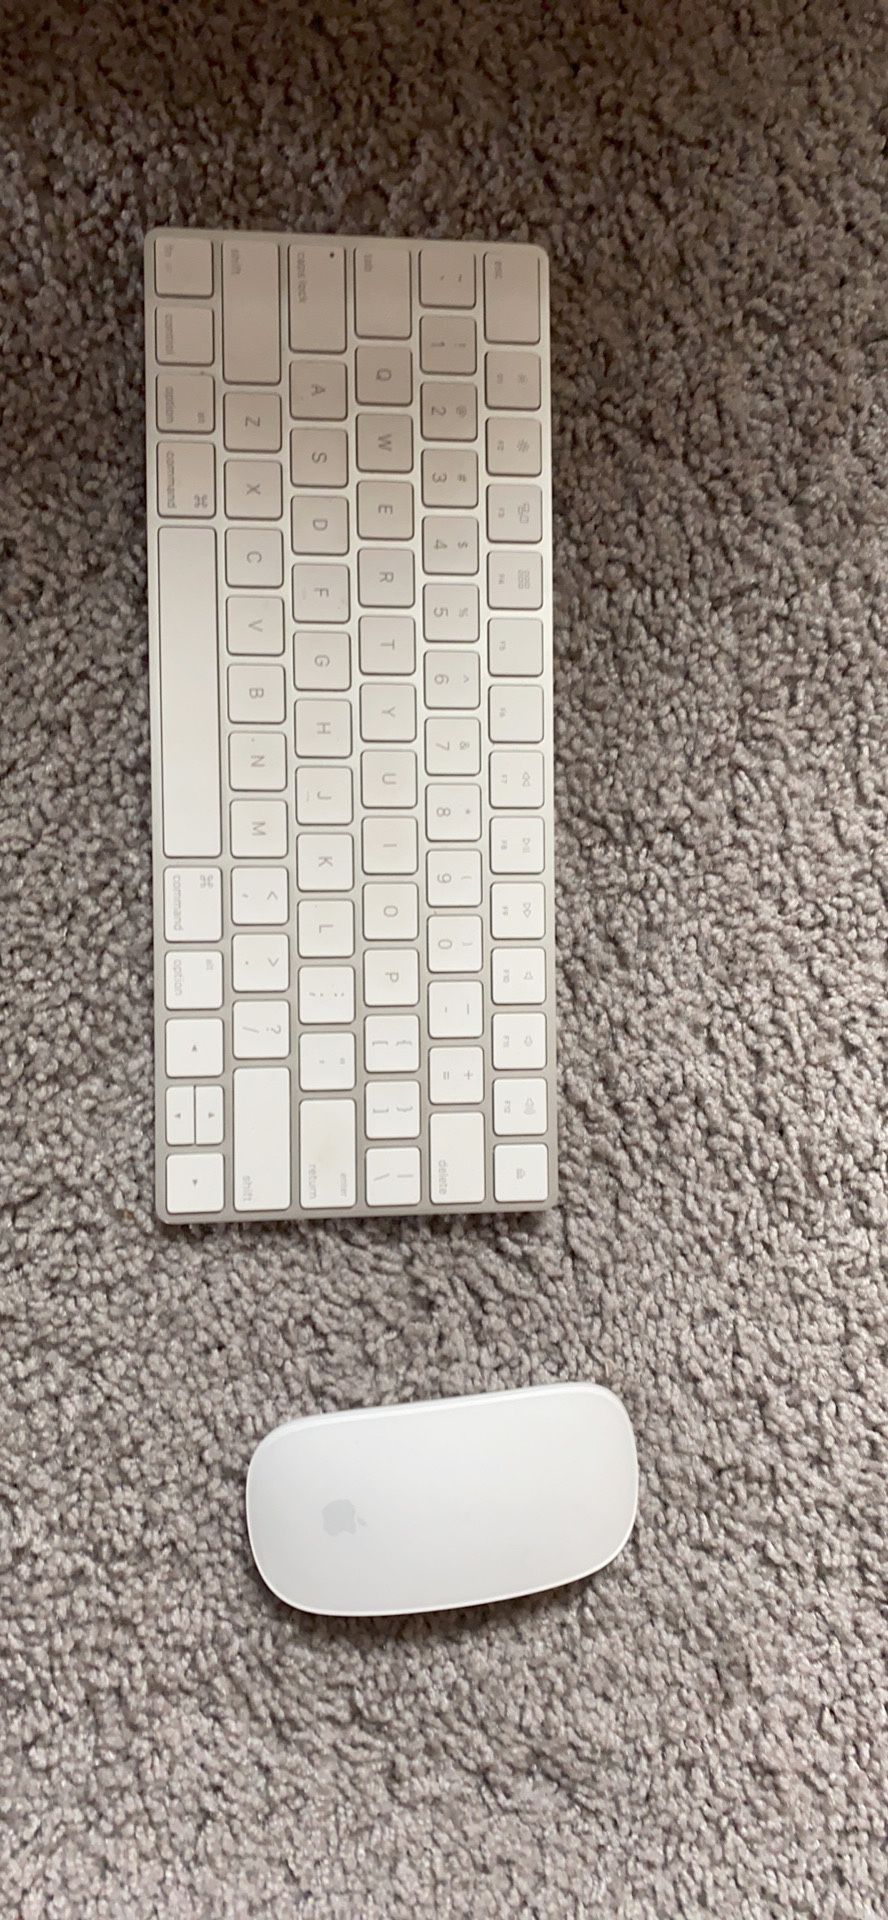 Apple wireless keyboard and Magic Mouse